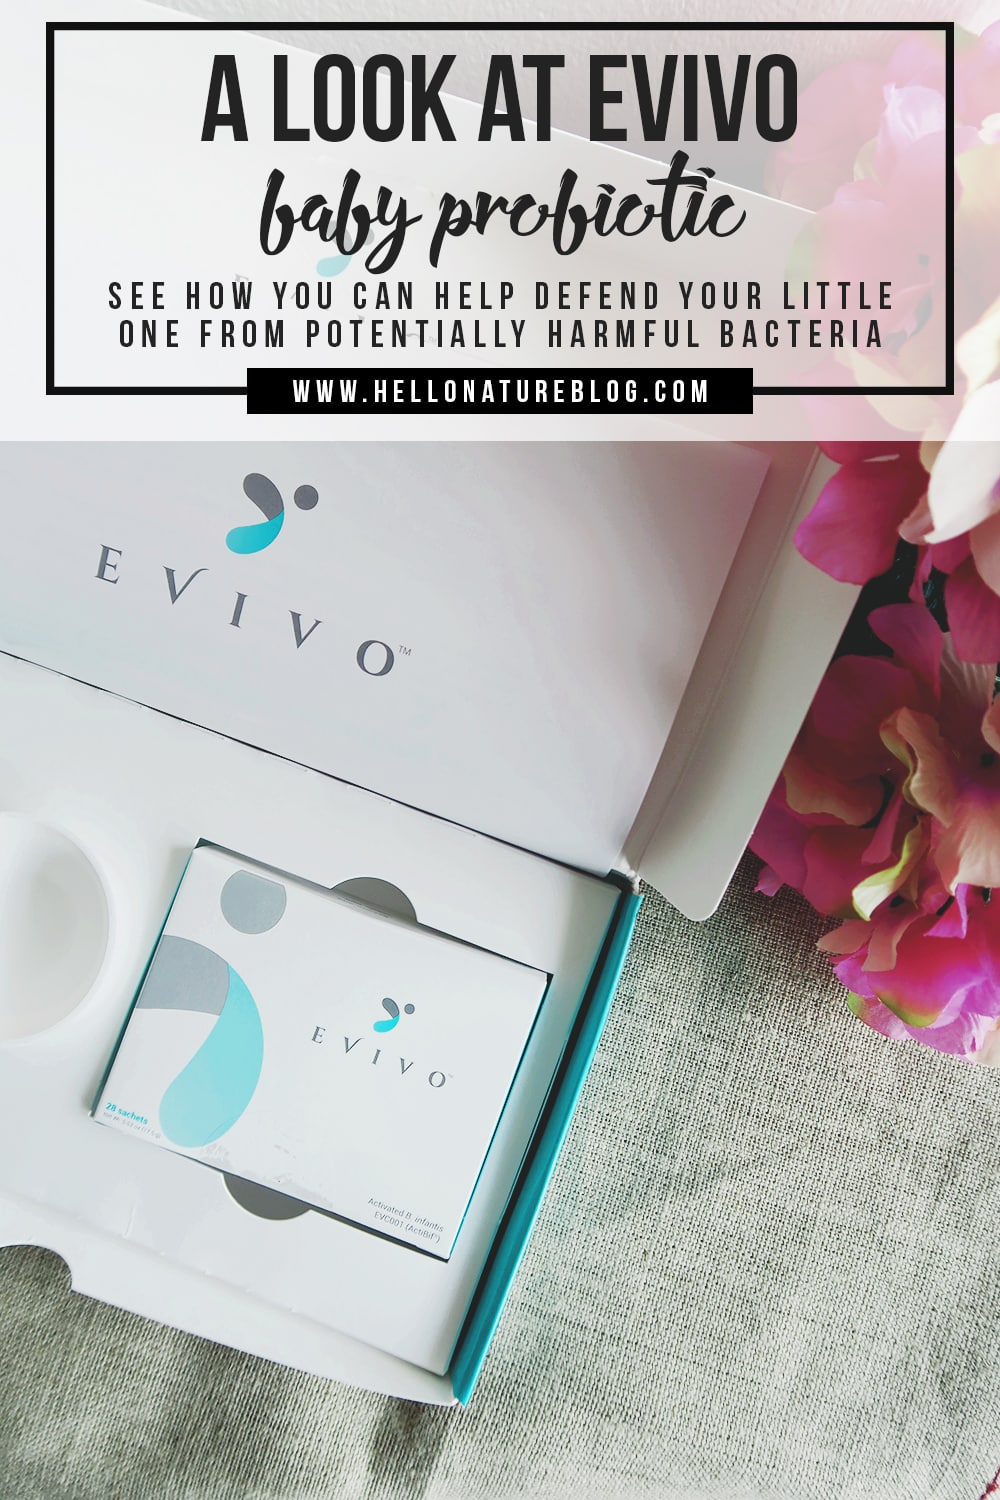 Evivo baby probiotics are the only probiotic clinically proven to defend from potentially harmful bacteria linked to colic, eczema, allergies, diabetes and obesity. See how they can help your little one here.